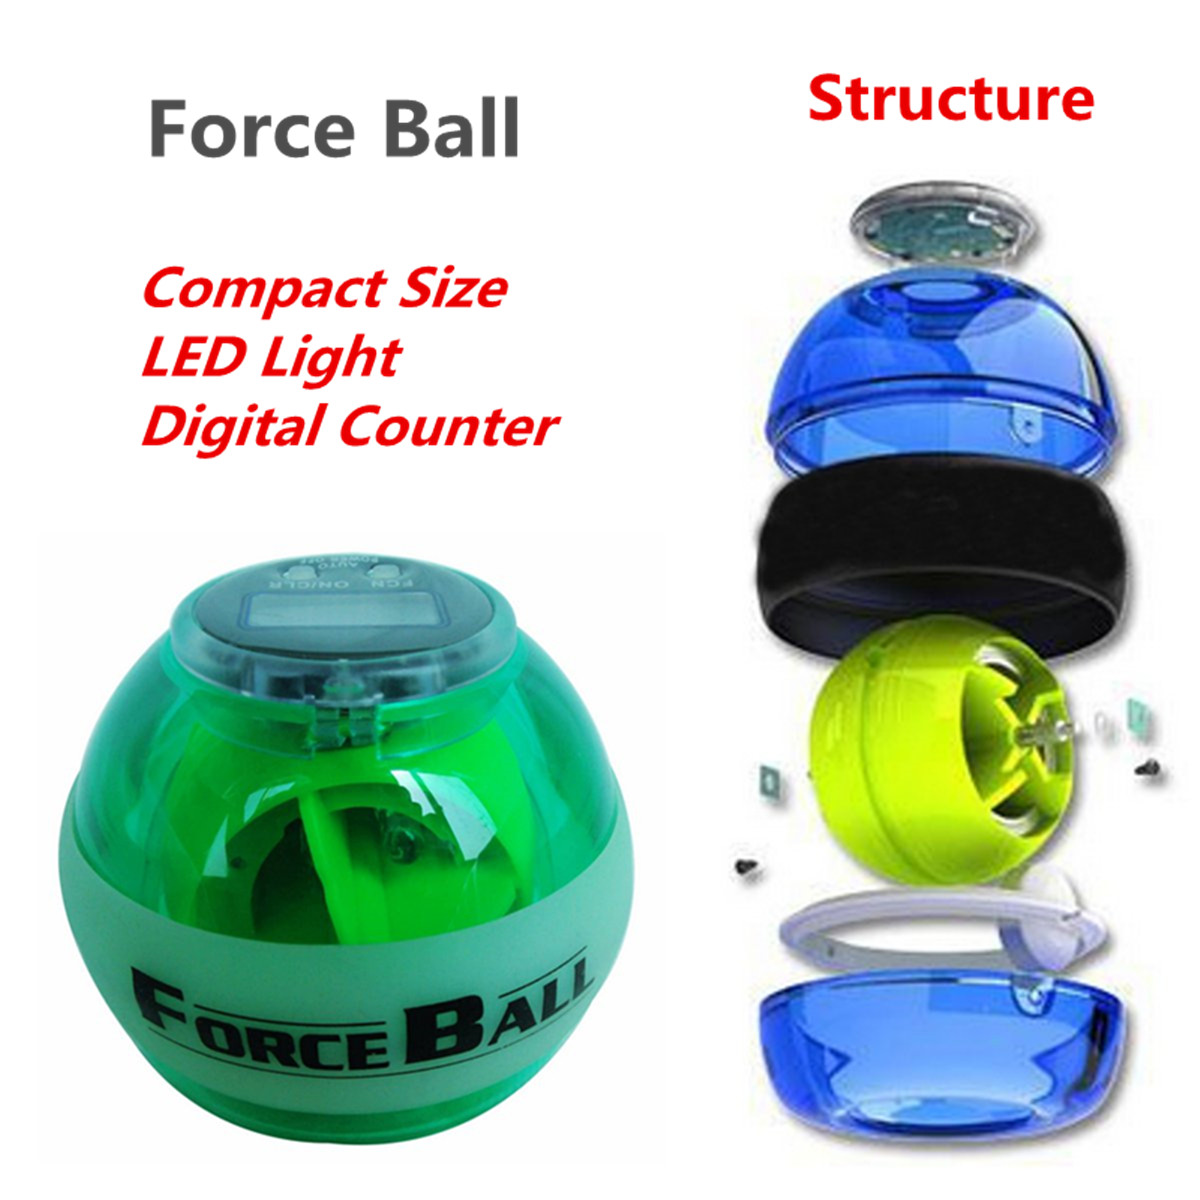 Multifunction Power Wrists Ball Hand Grip Exercise Wrist Gyroscope Counter Speed Meter LED Lighting Carpal Expander Equipment